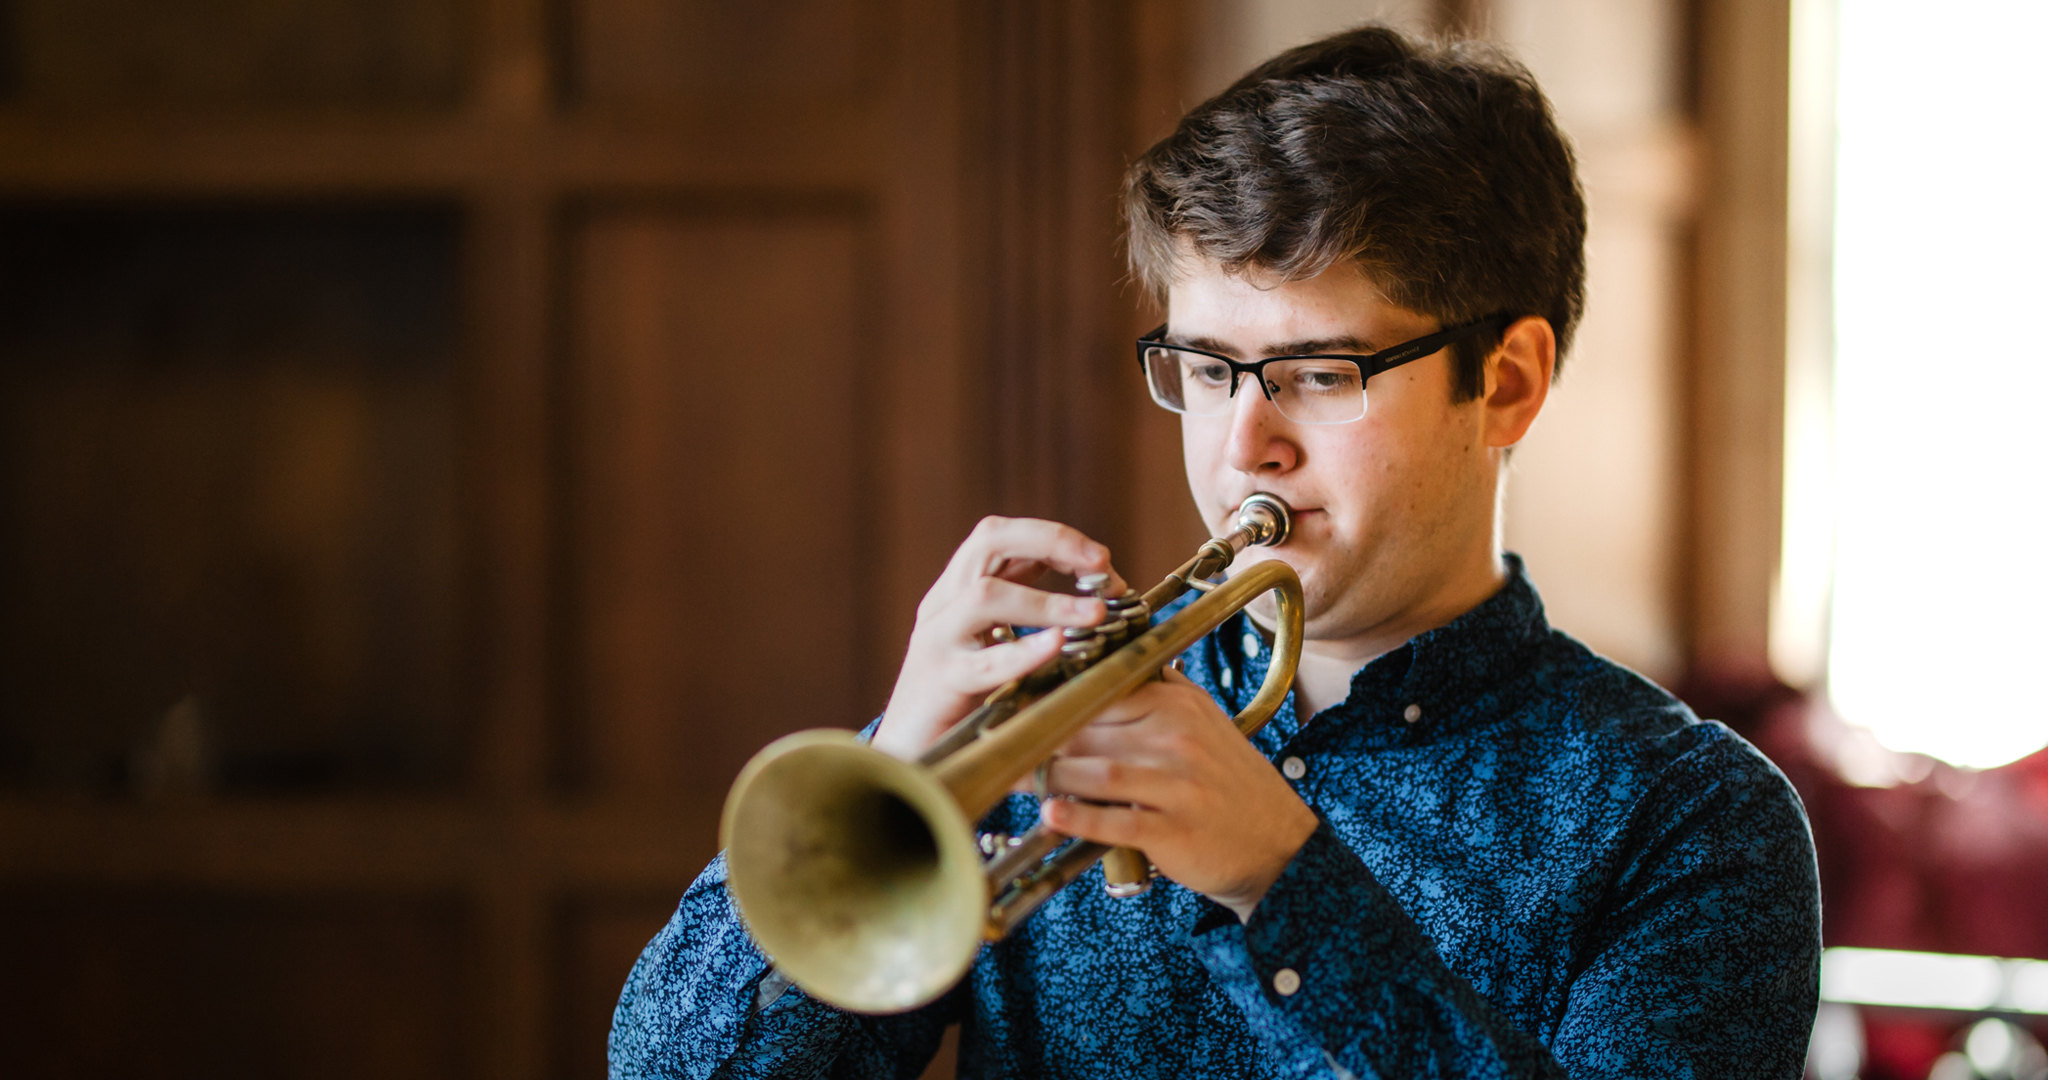 Student playing trumpet